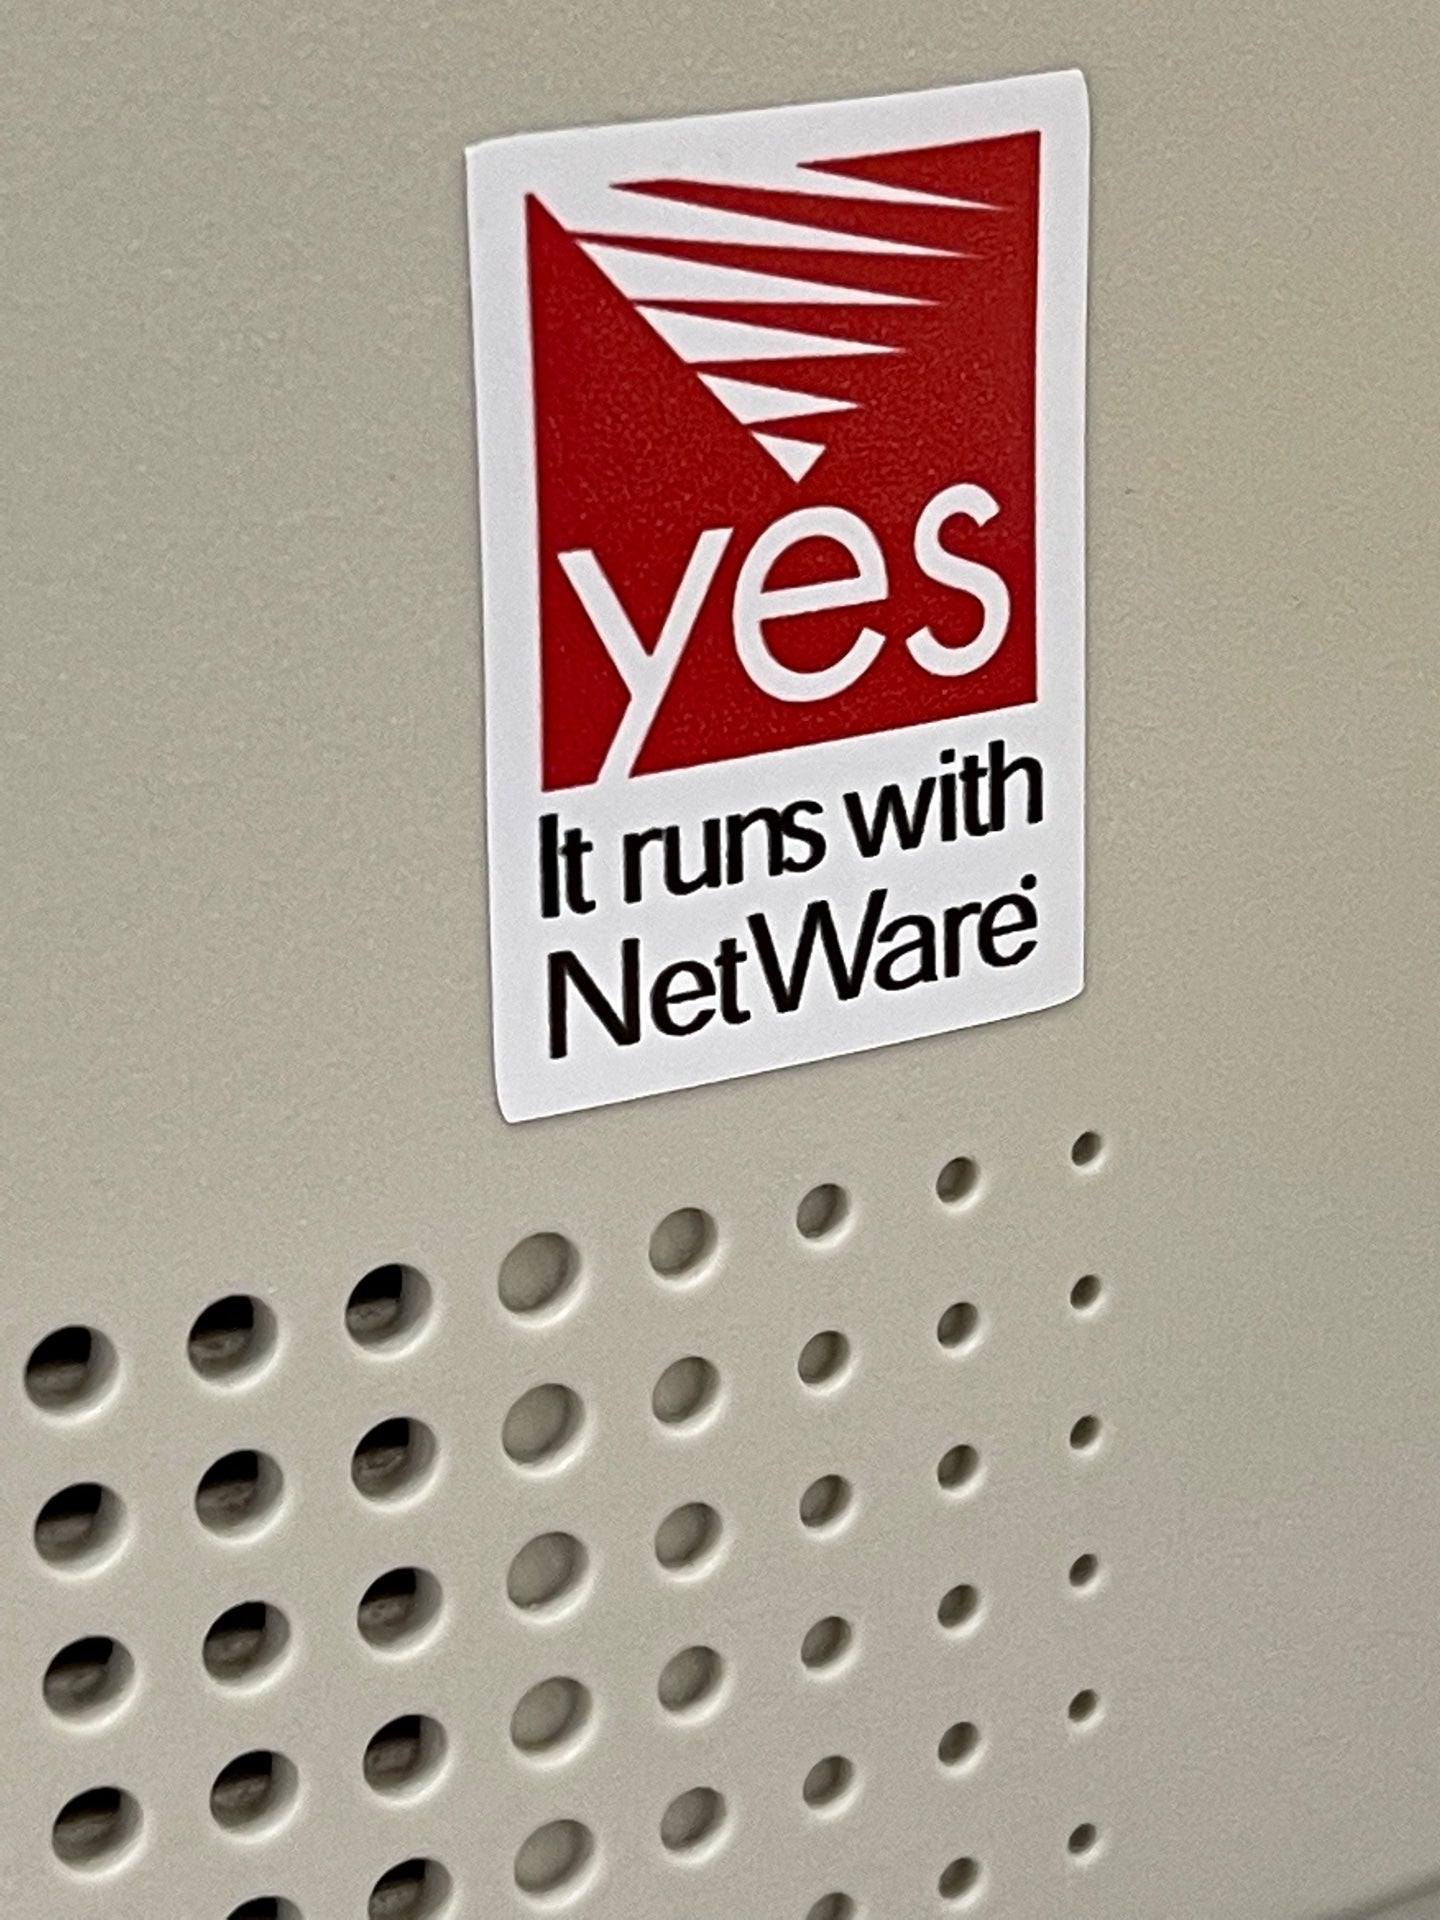 Novell "Yes, It runs with NetWare" Network OS Sticker - White